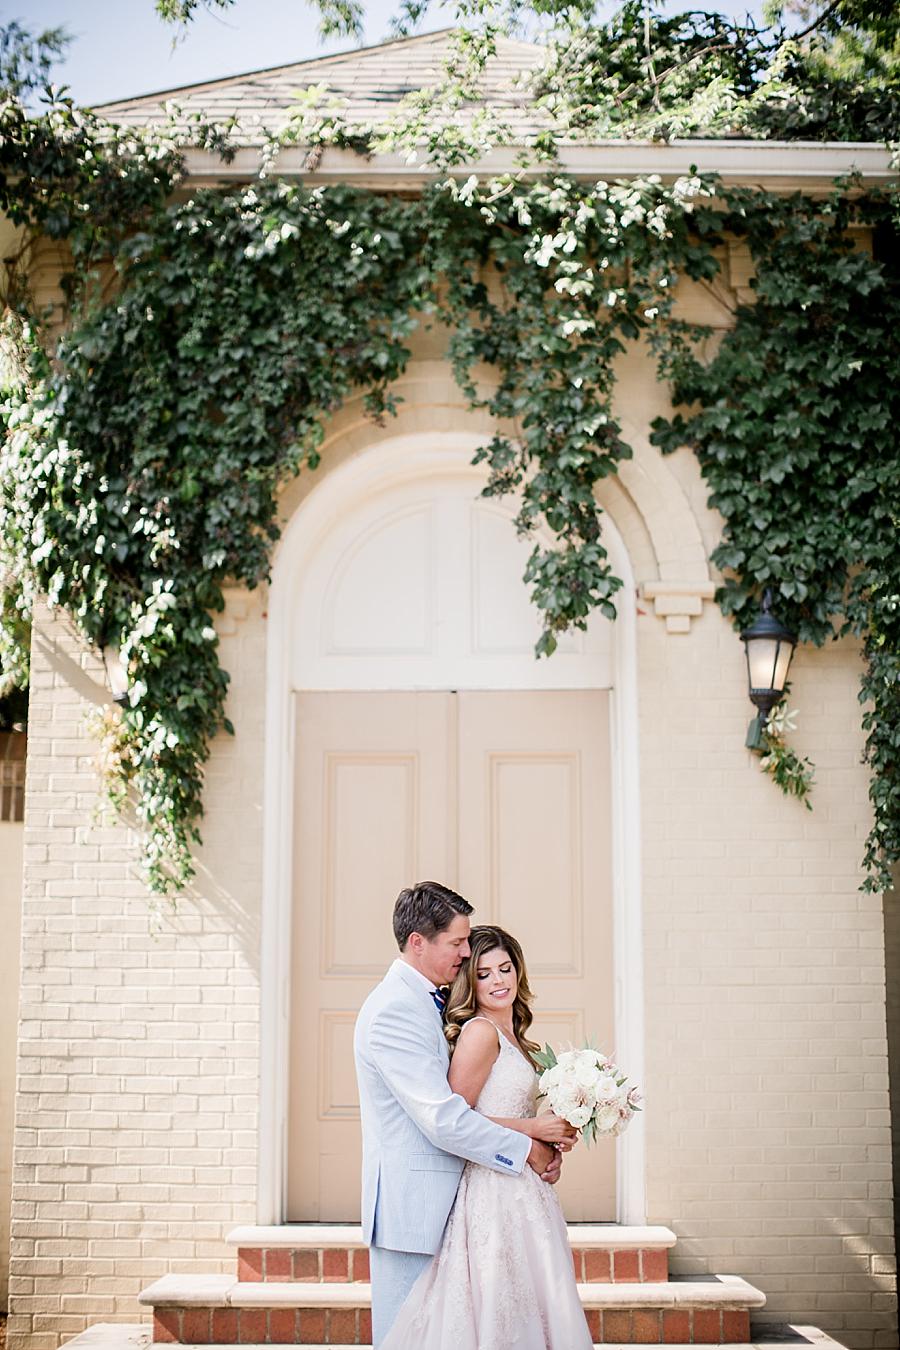 Back to chest at this East Ivy Mansion Wedding session by Knoxville Wedding Photographer, Amanda May Photos.